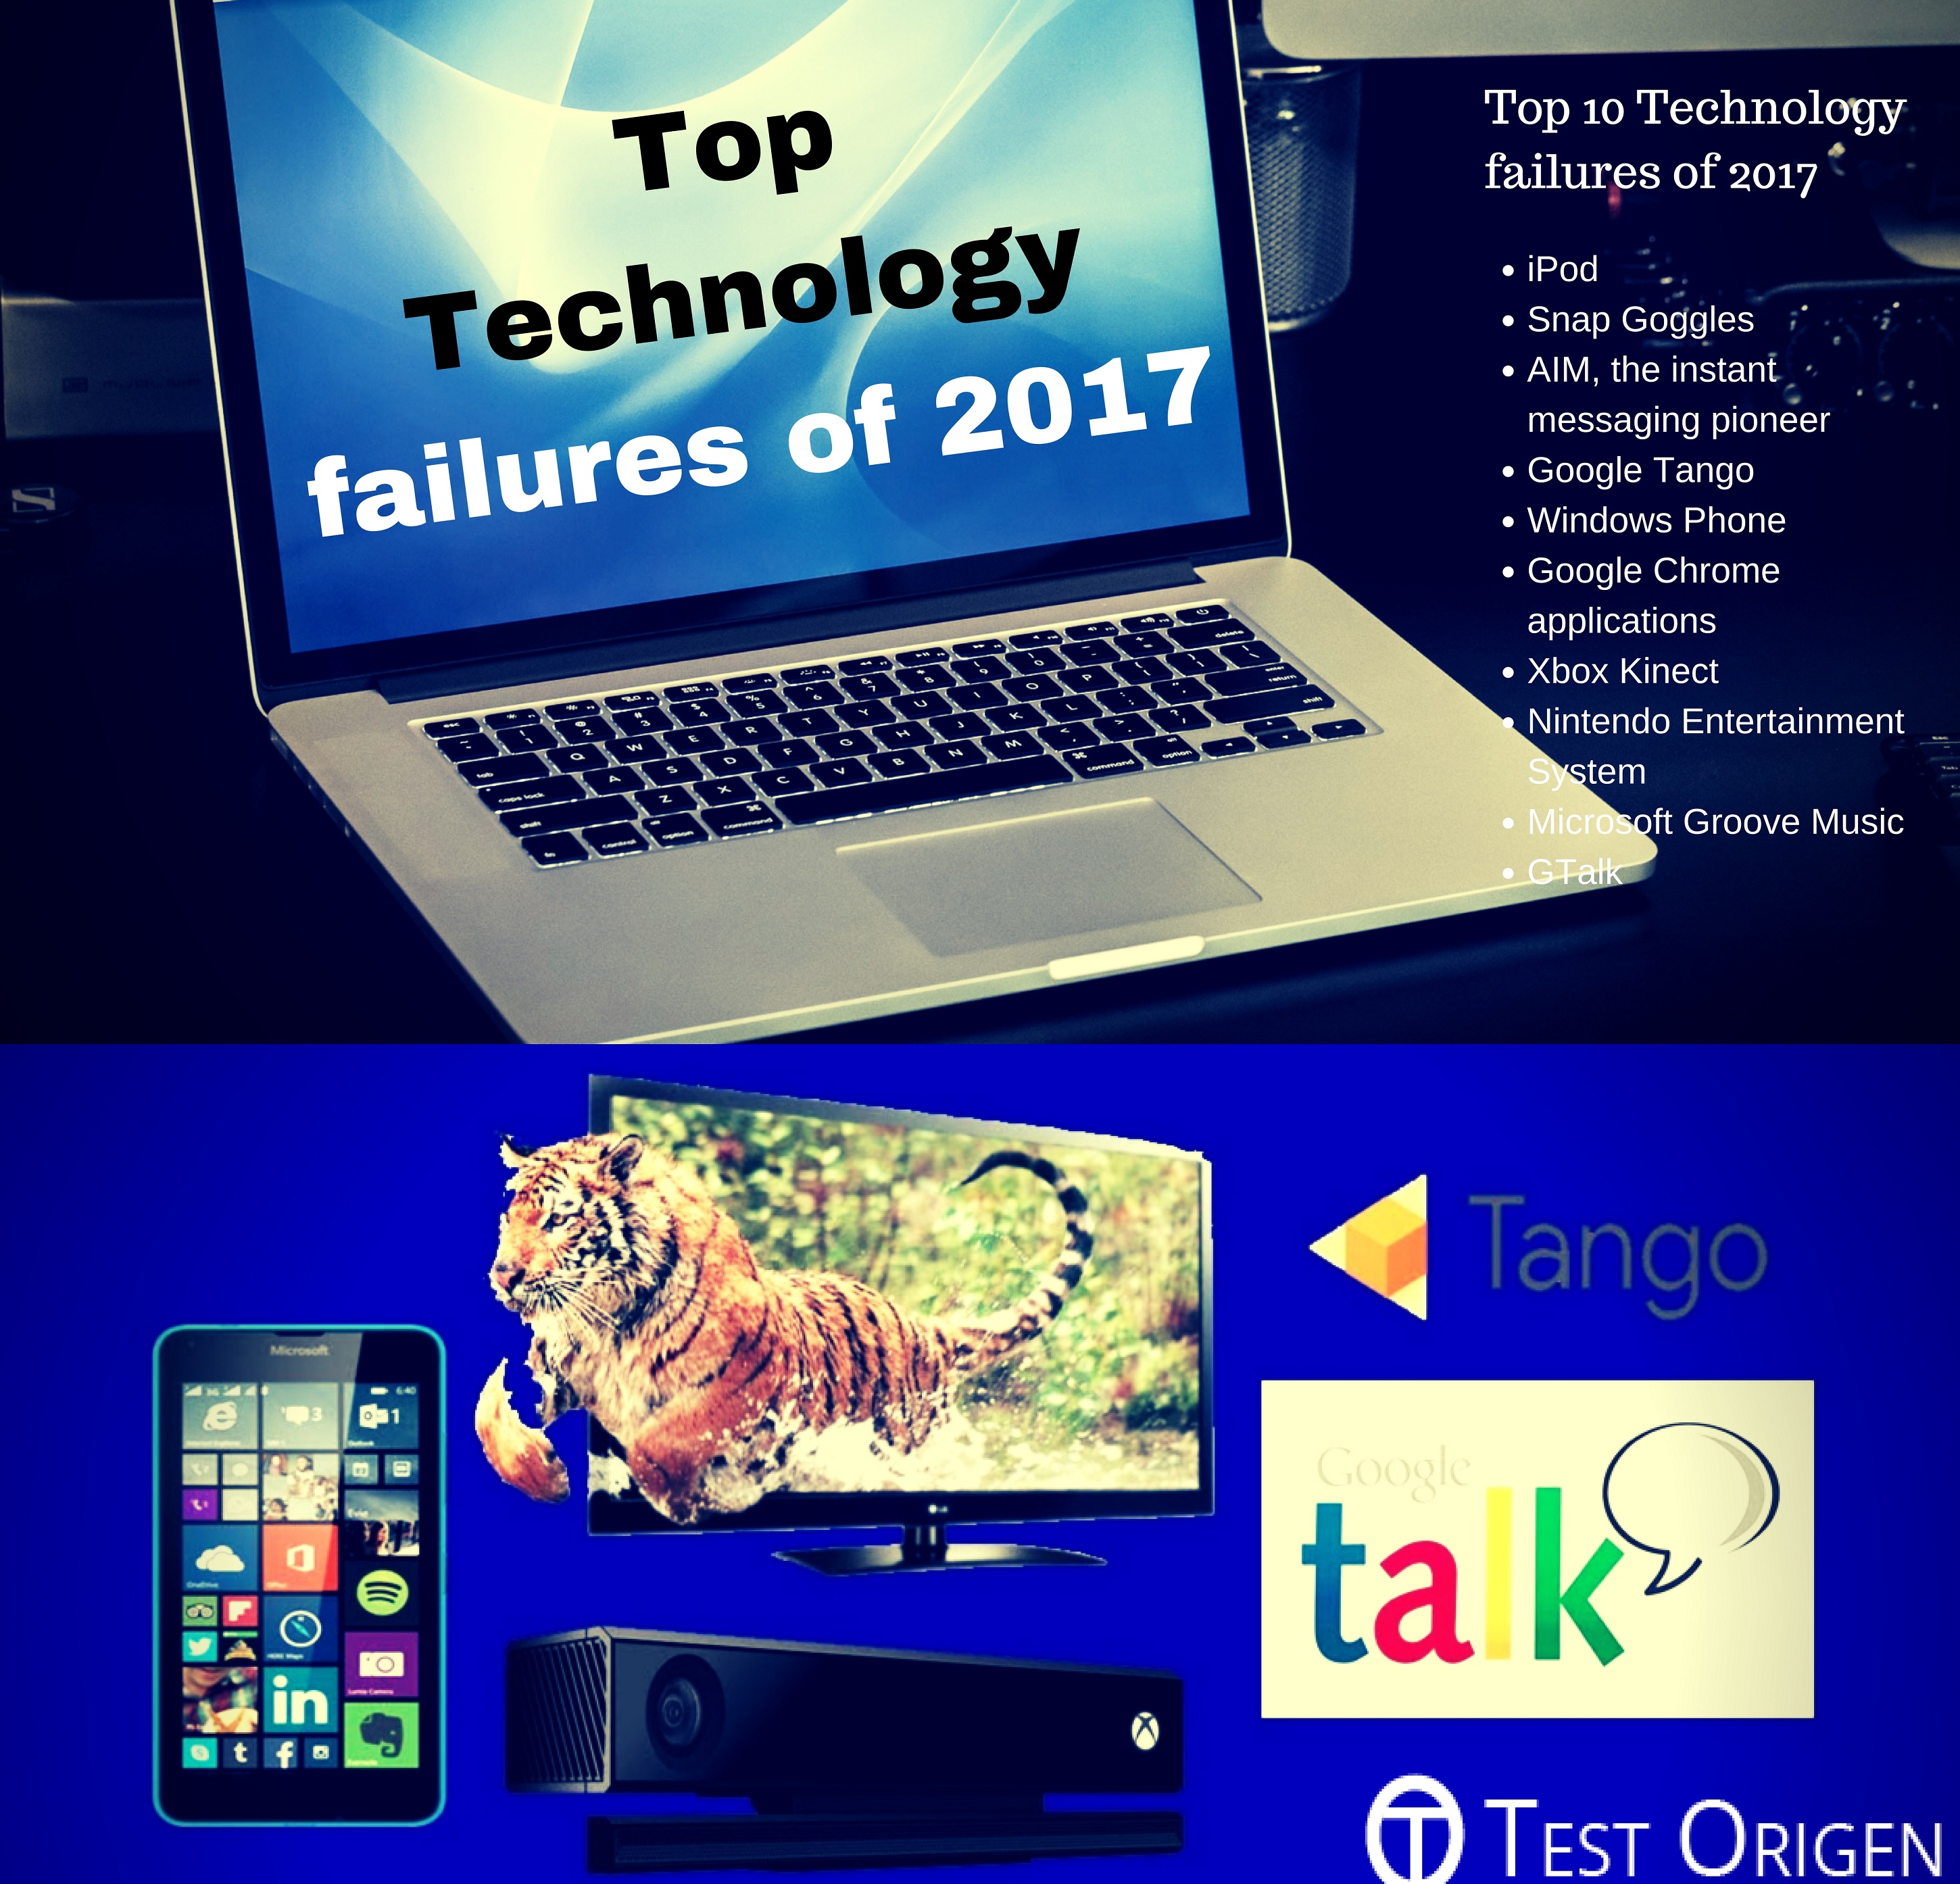 Top Technology failures of 2017